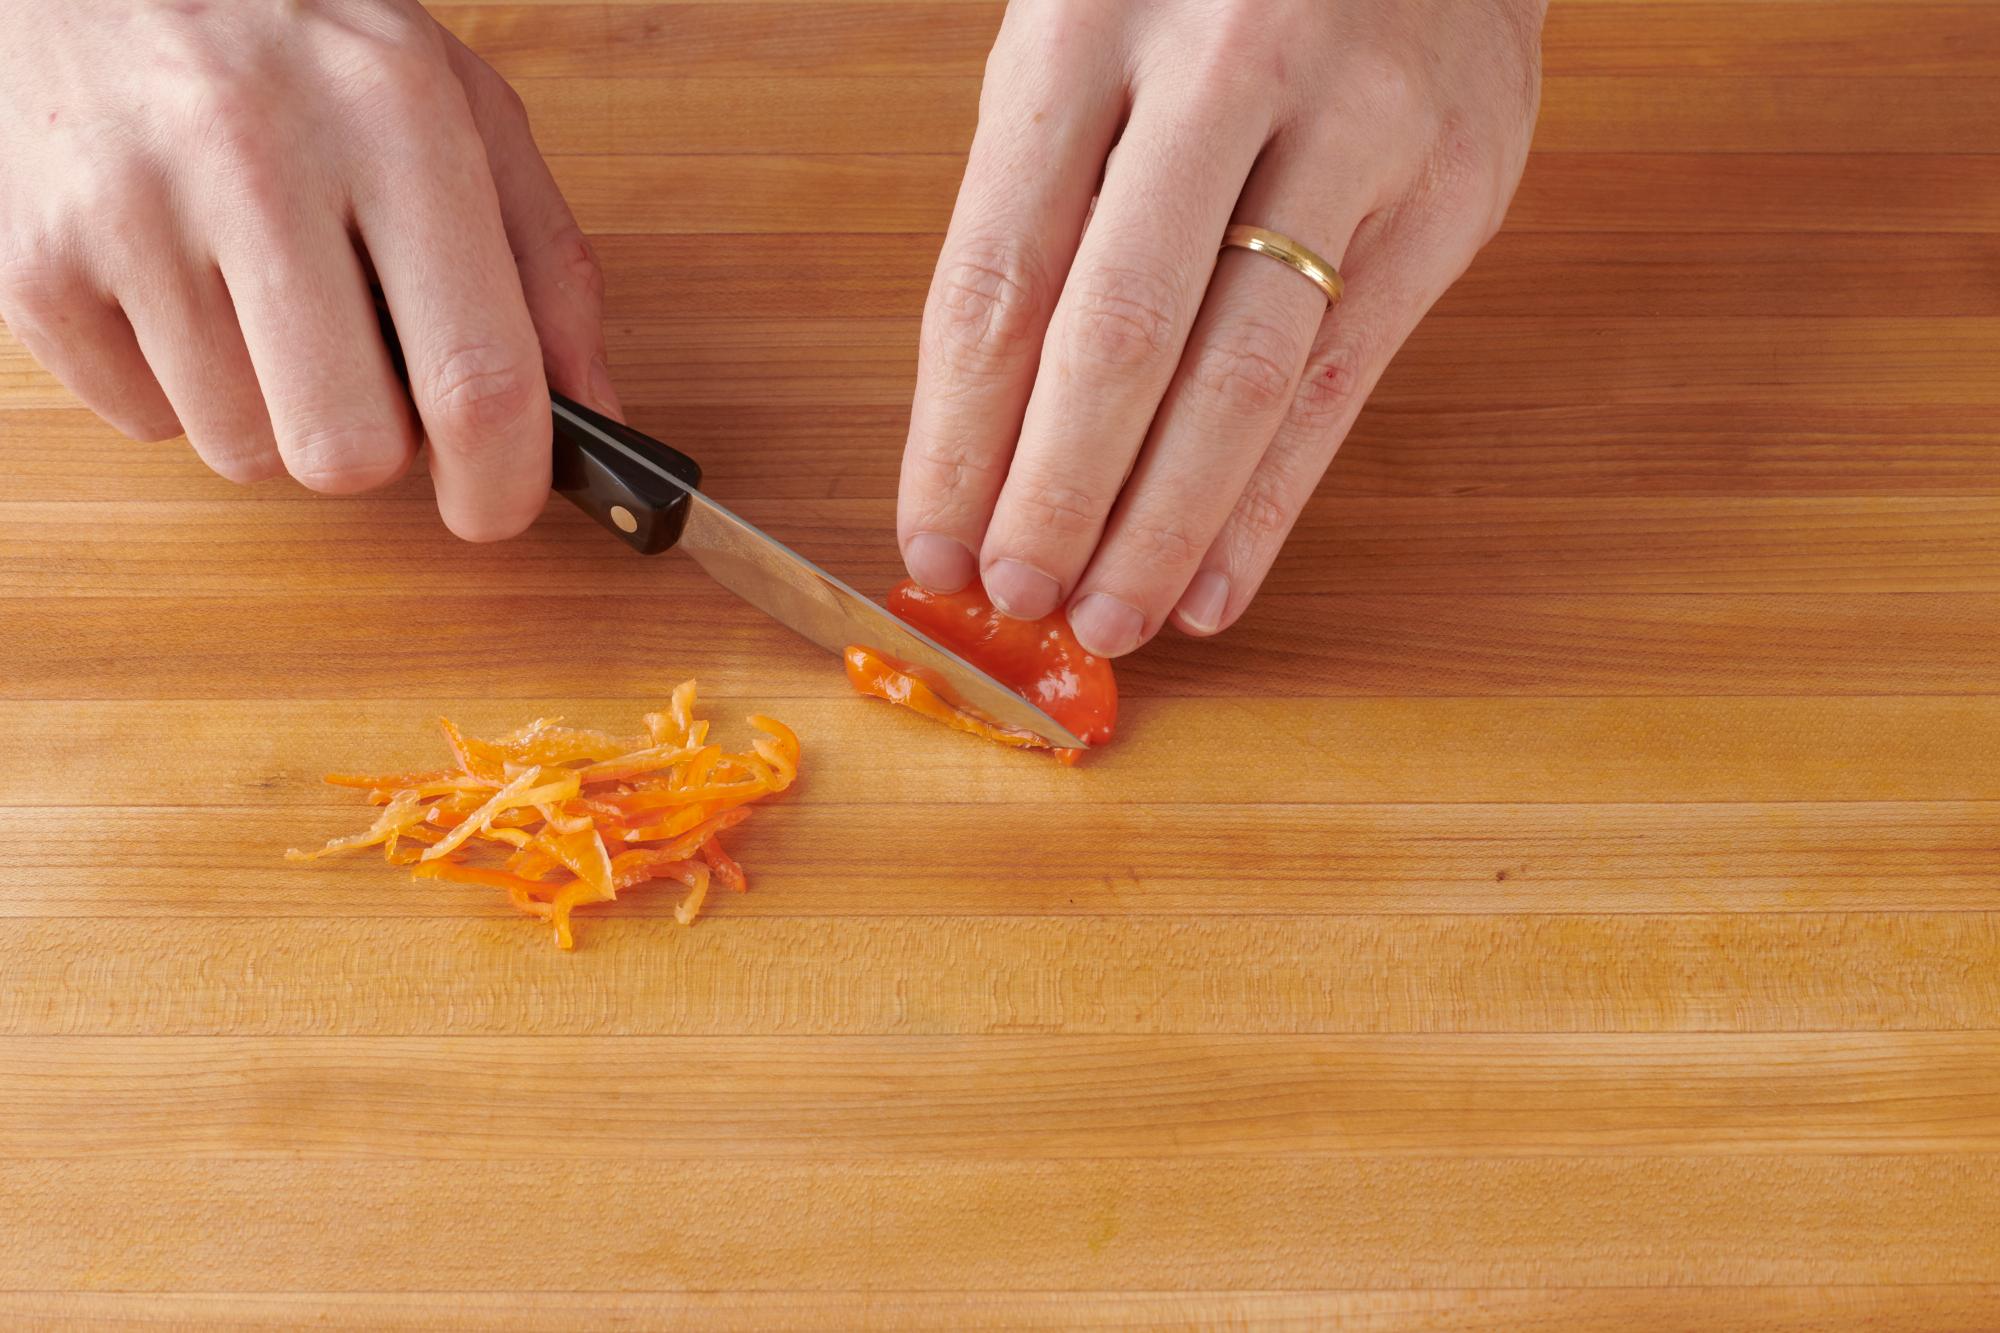 Slicing the habanero with a 4 Inch Gourmet Paring Knife.